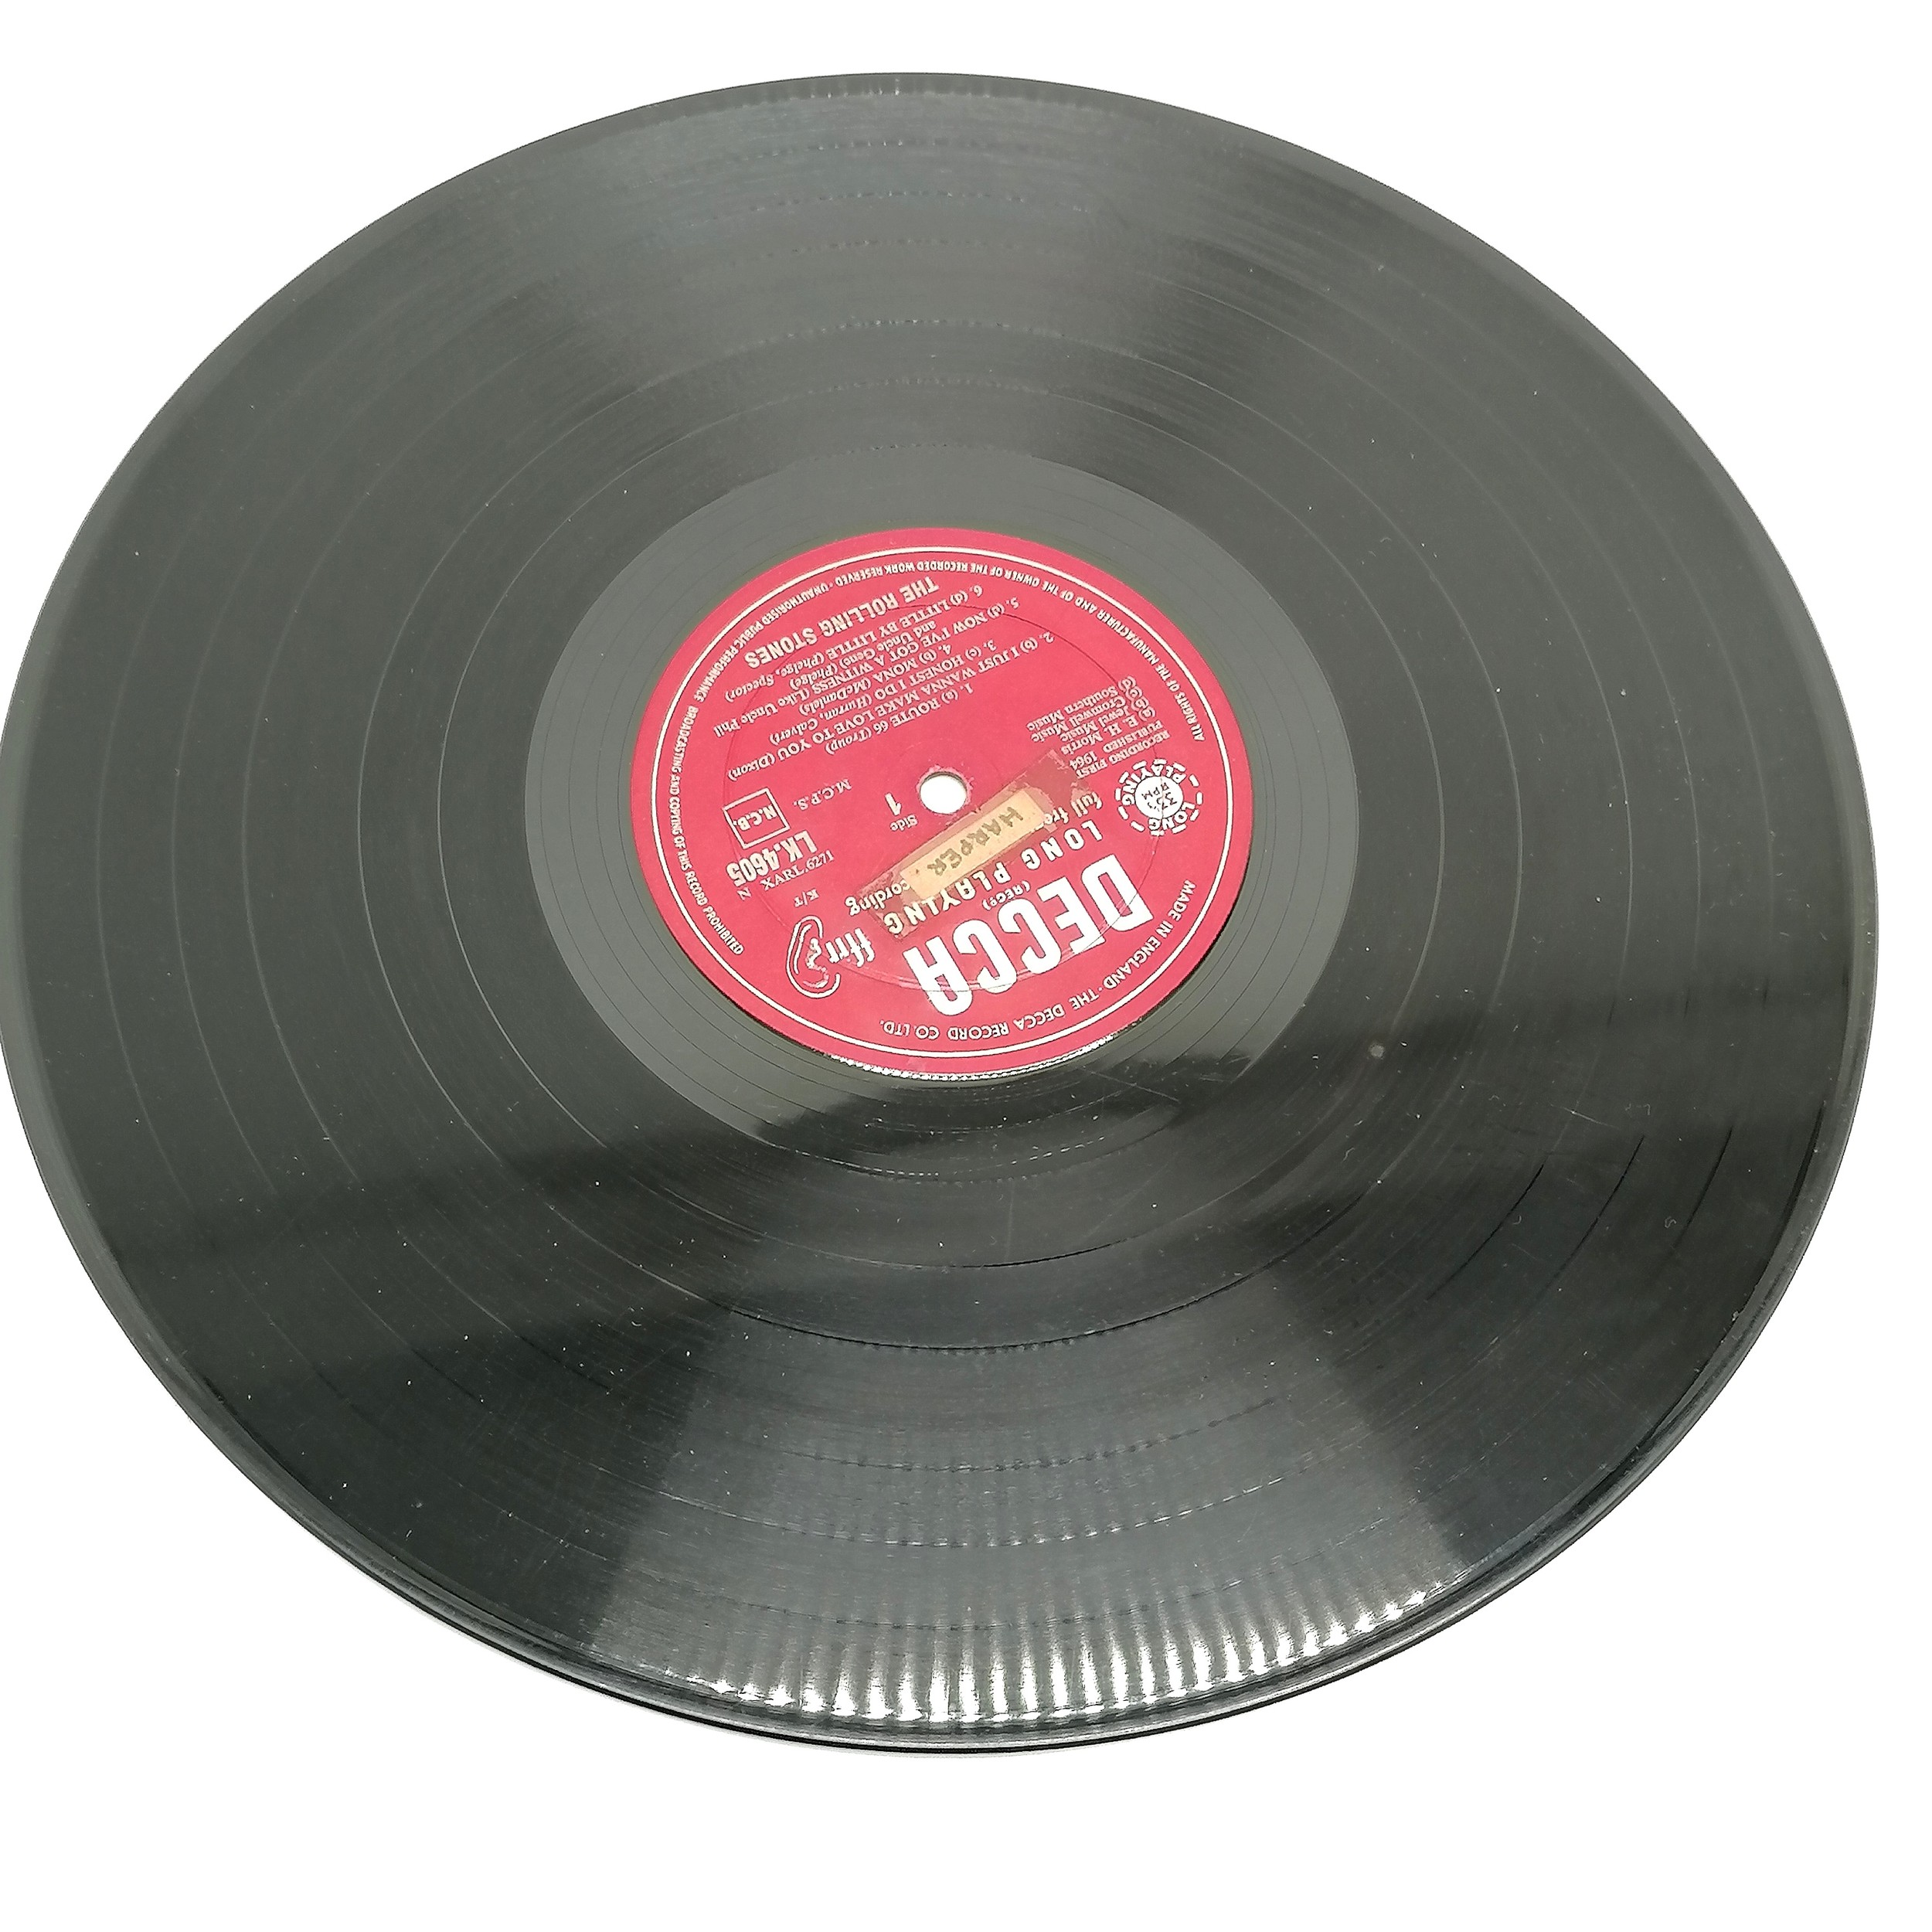 First album (1964) of the Rolling Stones by Decca MONO LK 4605 ~ the vinyl has a red/silver Decca ' - Image 3 of 4